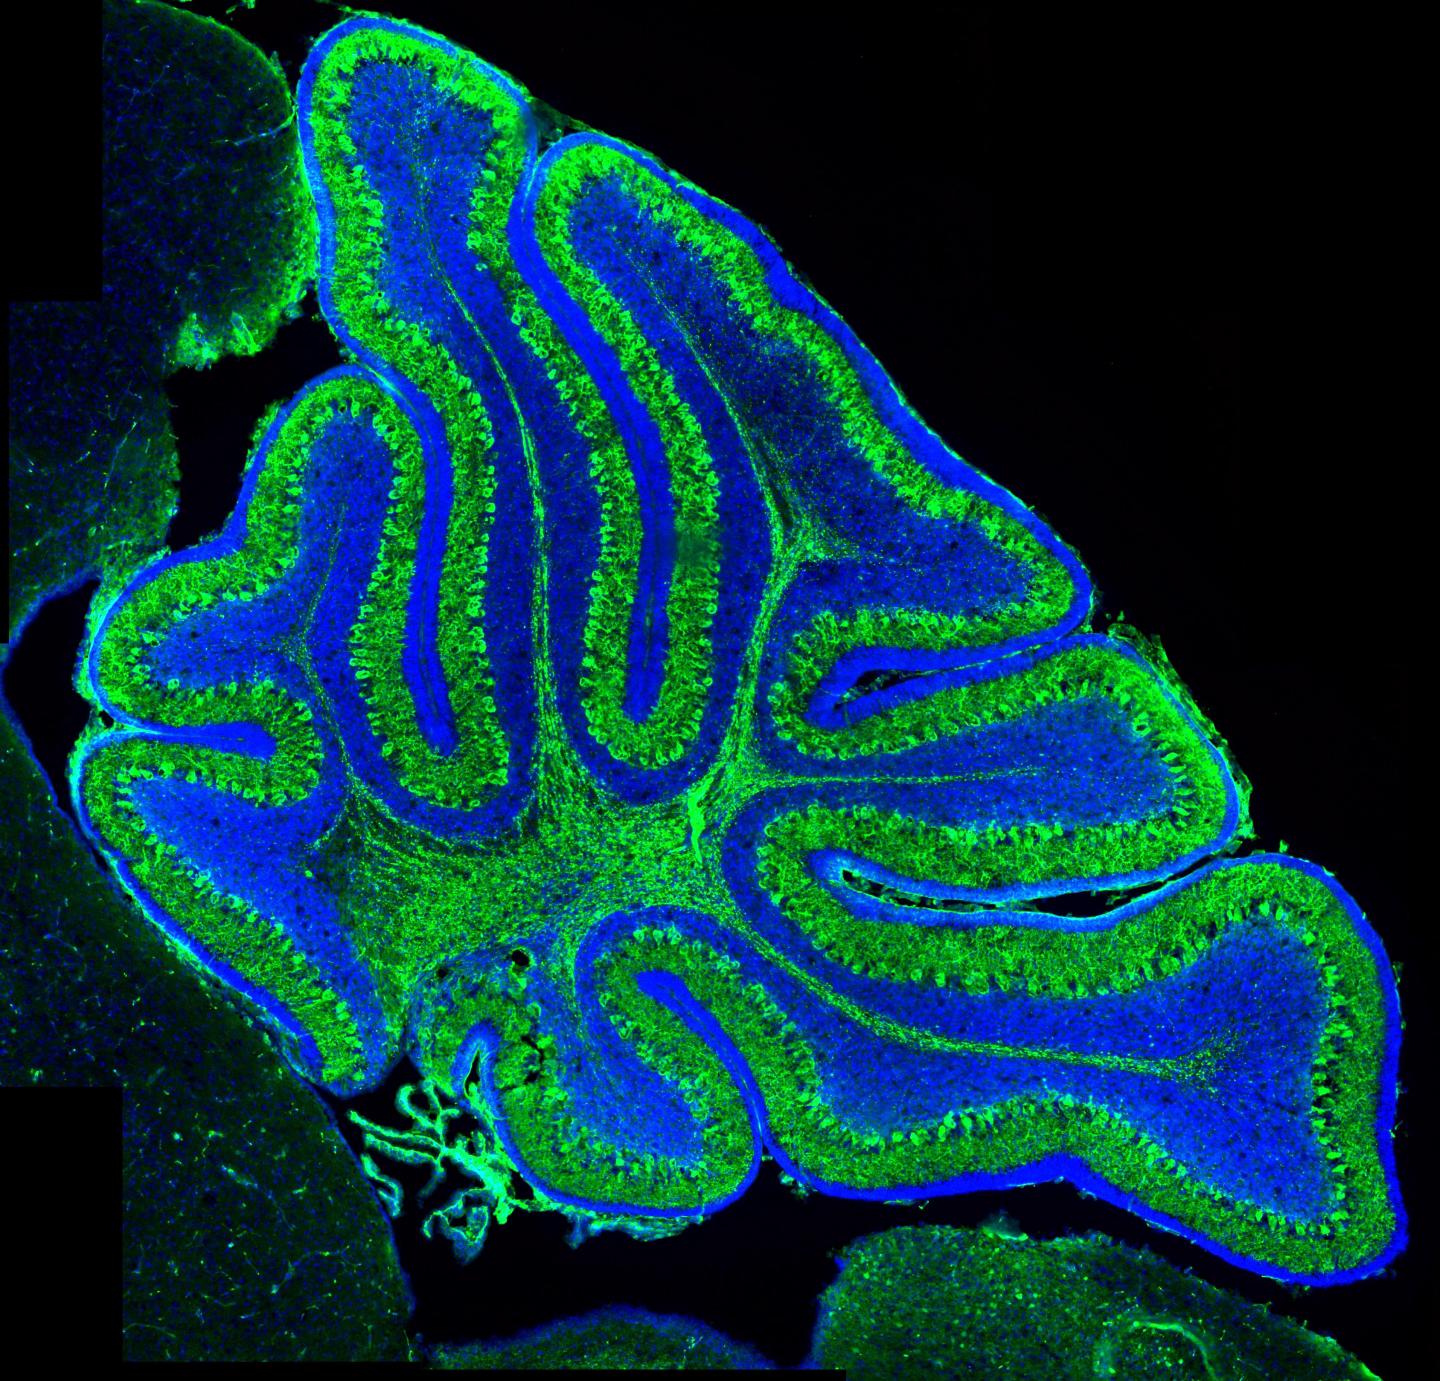 Image of the mouse cerebellum stained with blue and green